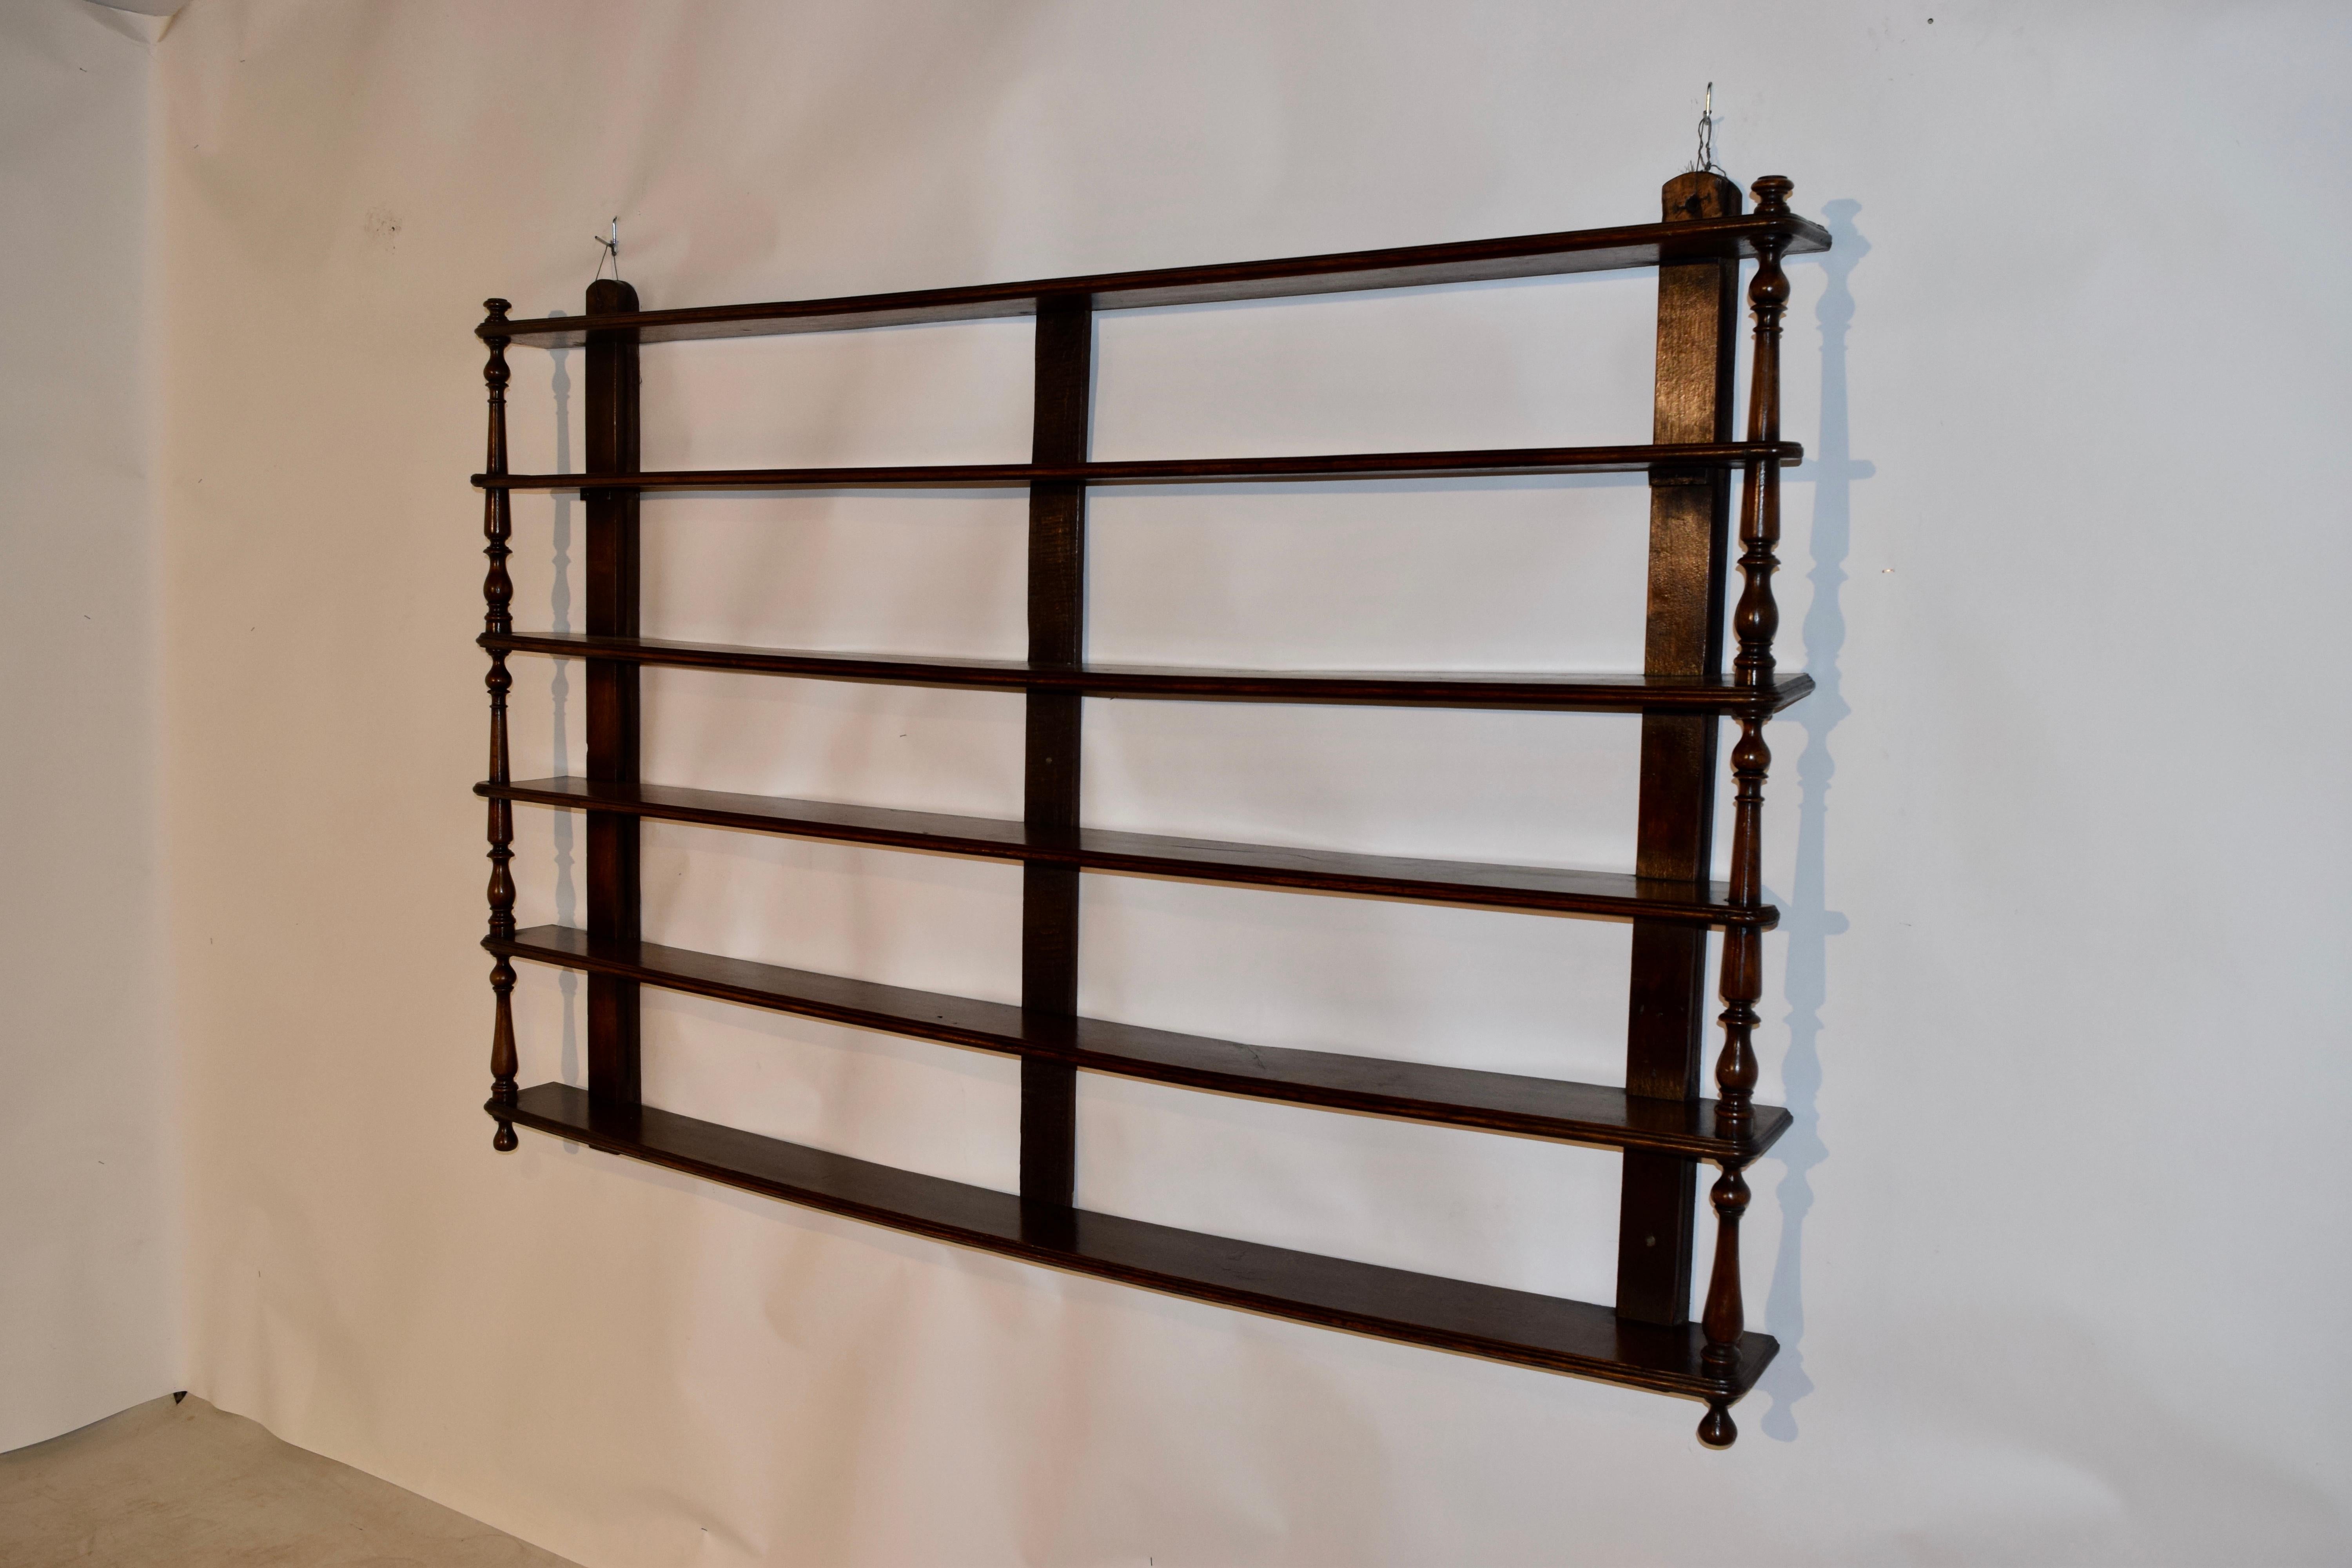 Early 19th century oak wall shelf from England. there are three wall braces on the back which have six shelves with molded edges attached to them and they are joined on the front by hand turned shelf supports. Finished with hand turned finials on